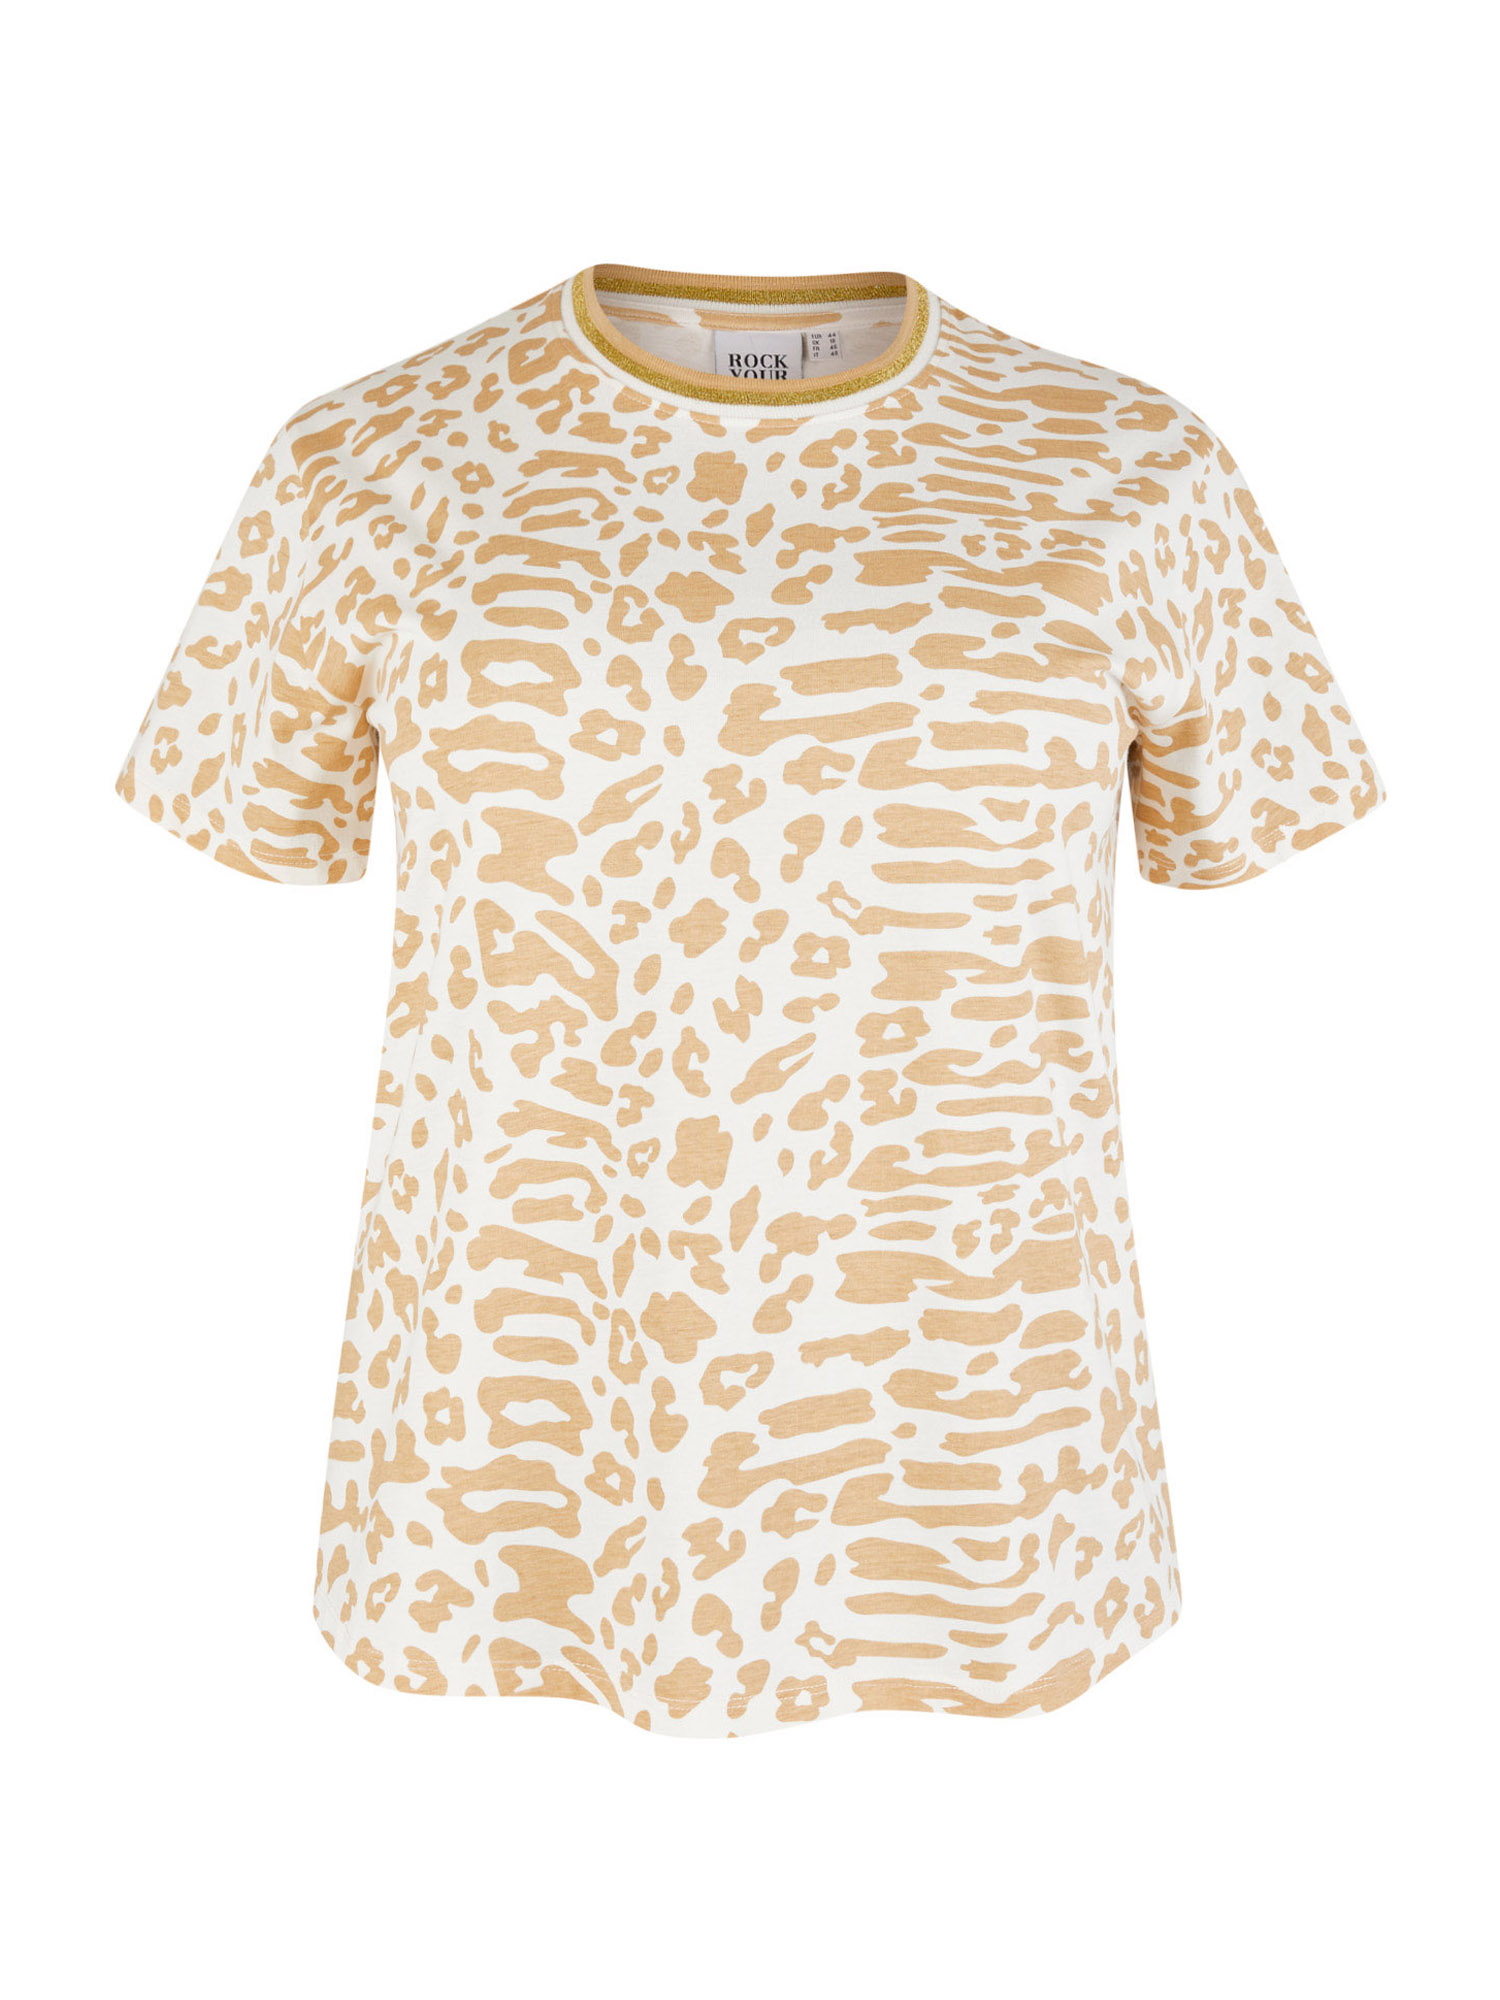 Rock Your Curves by Angelina K. T-shirt in Écru, Beige 